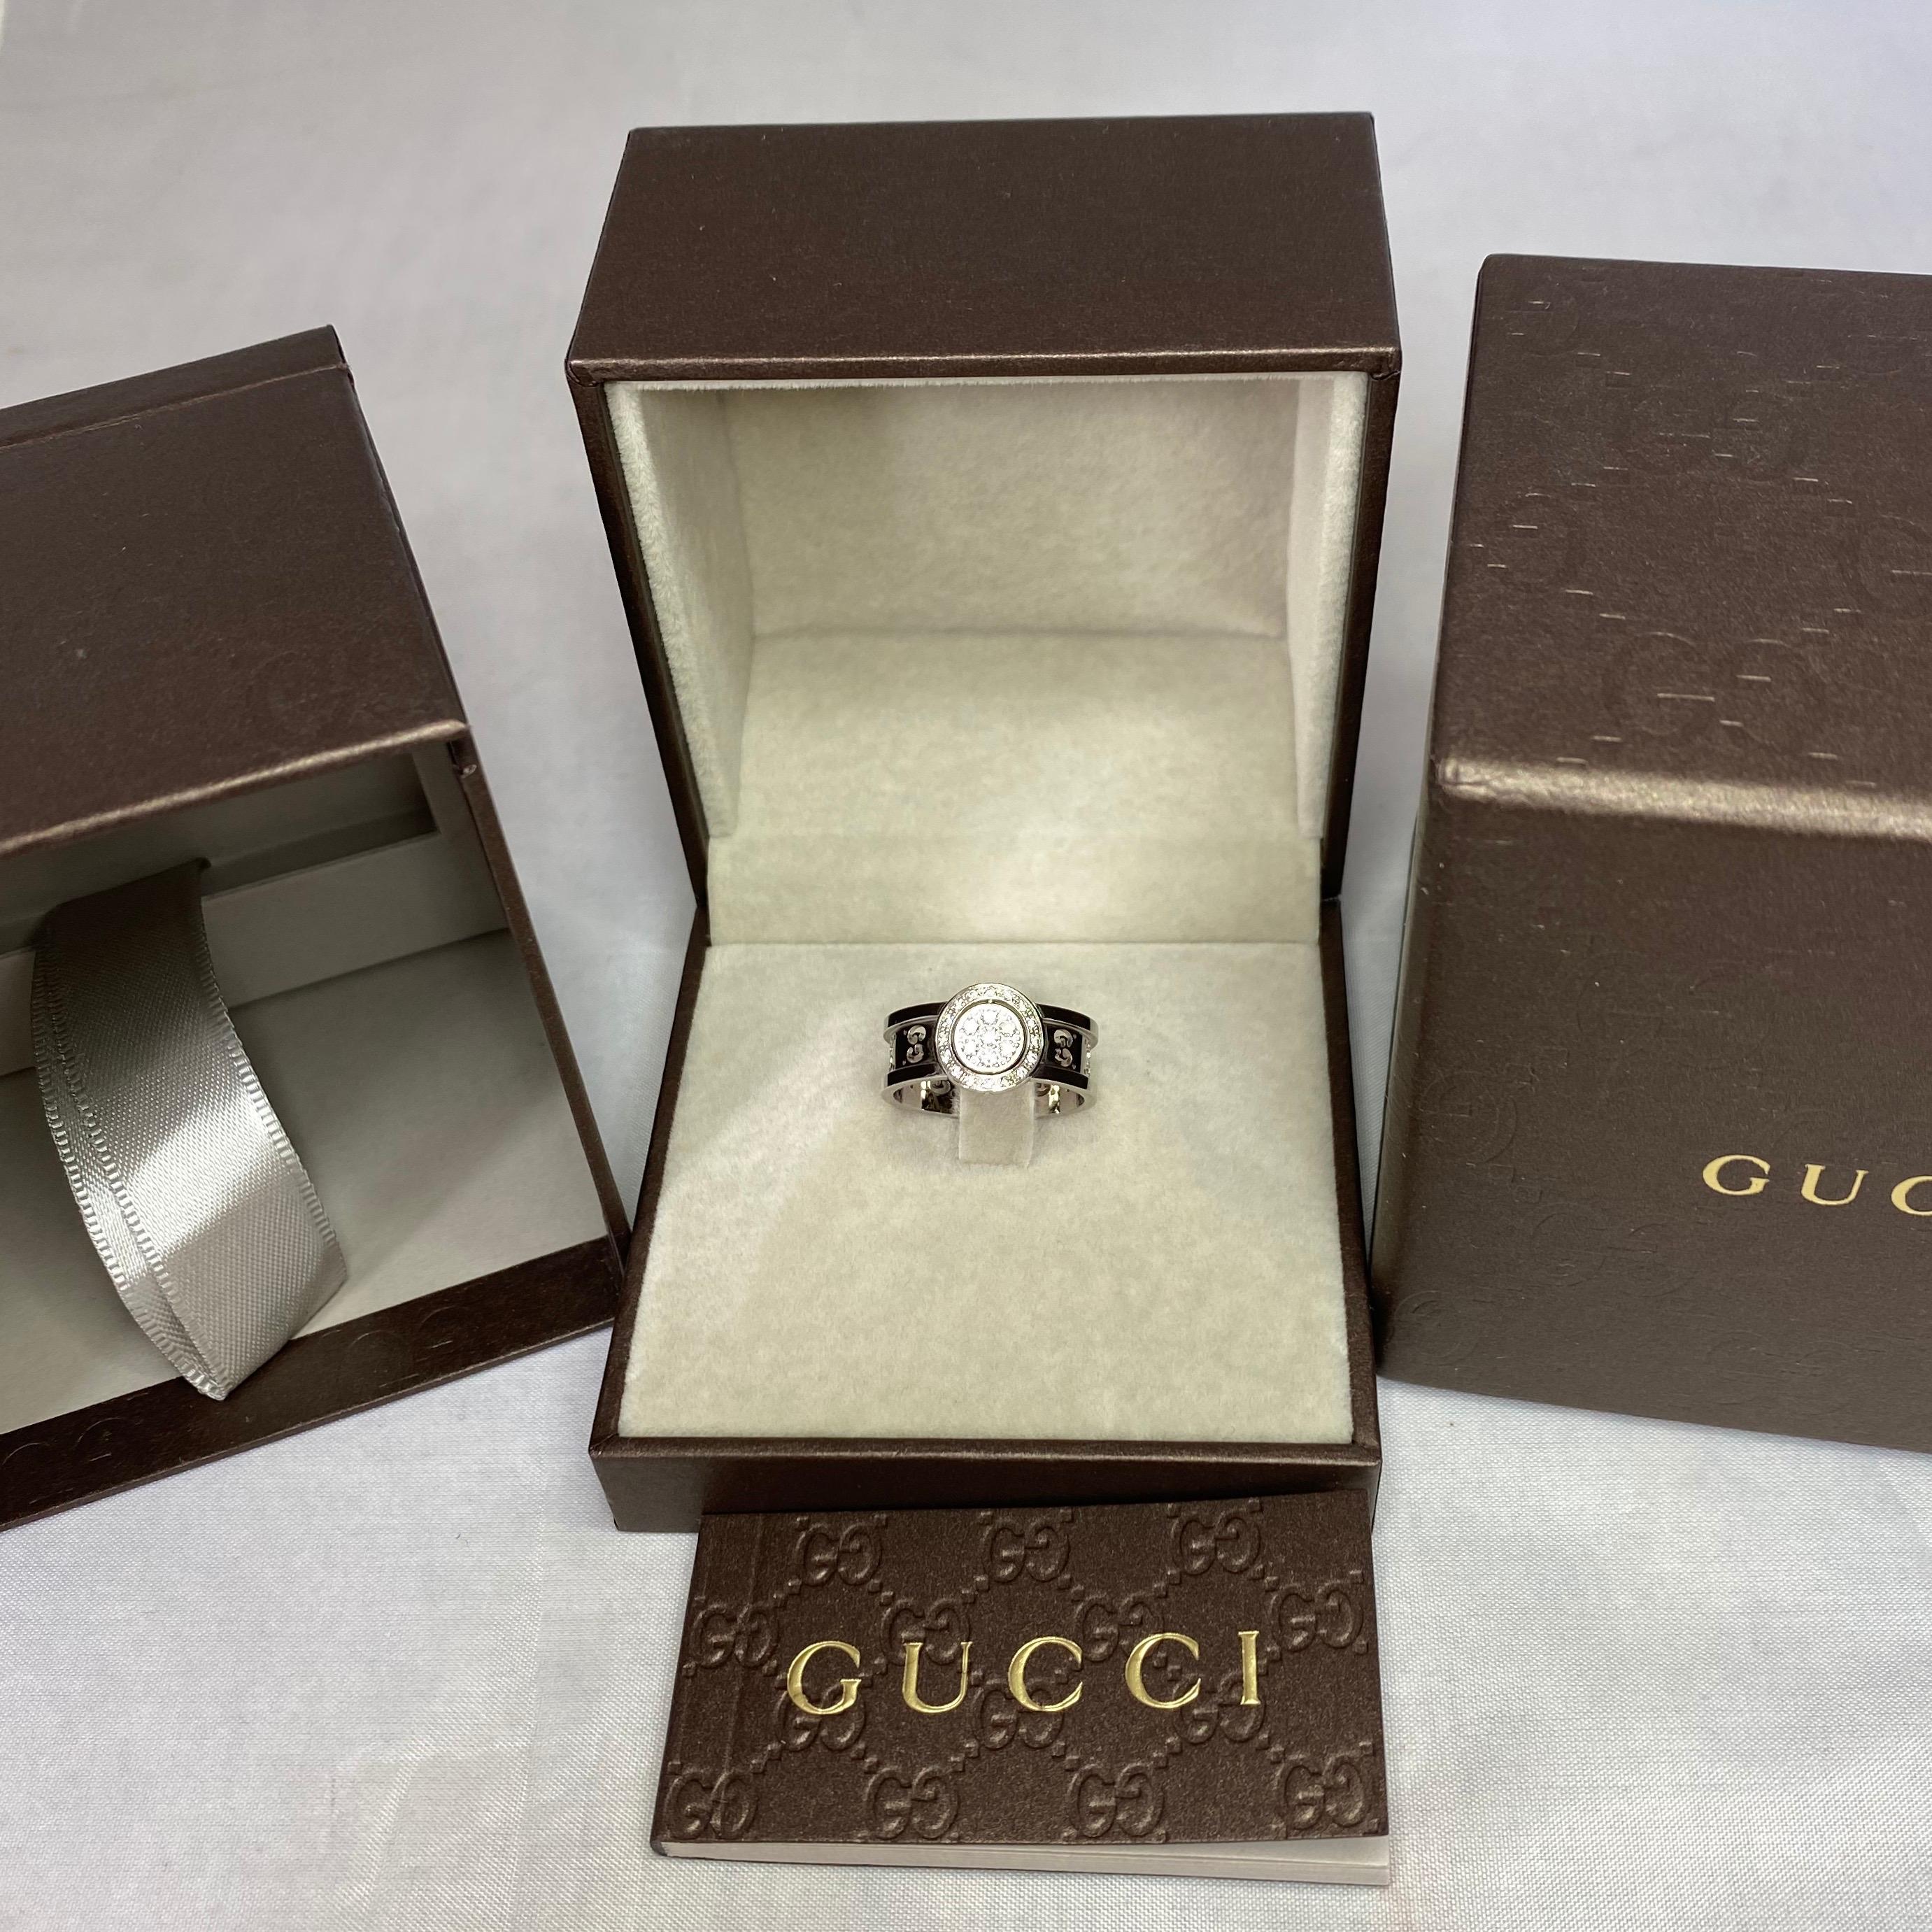 The “Icon Twirl” ring by Gucci is made of 18K white gold and x21 G/H colour VVS clarity diamonds. Only the very best quality diamonds are used by Gucci.
The ring has a width of 7 mm and can be worn with the twist centre-piece showing 5 diamonds or